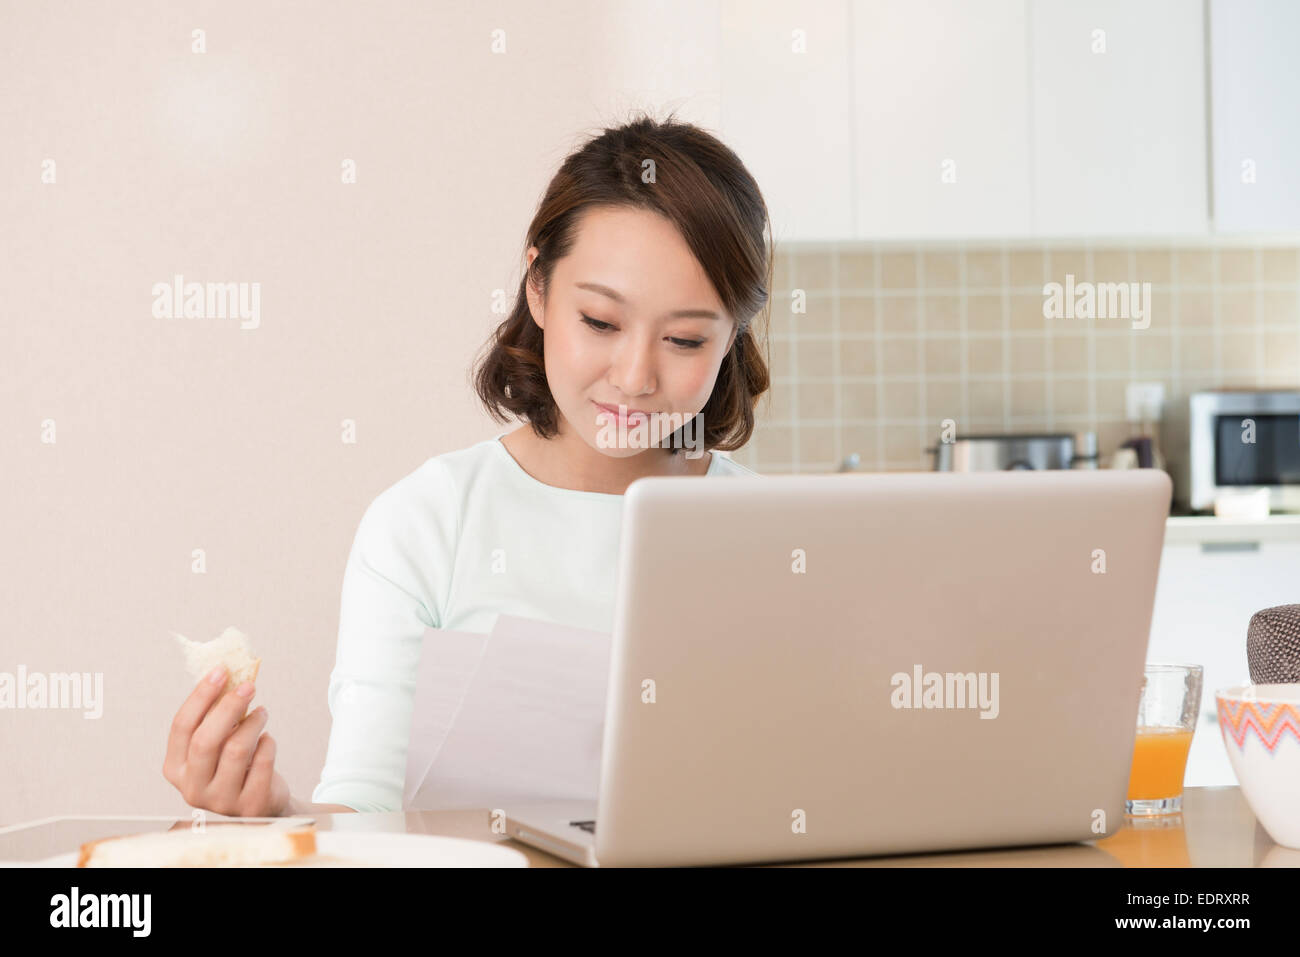 Young woman using laptop at breakfast Stock Photo